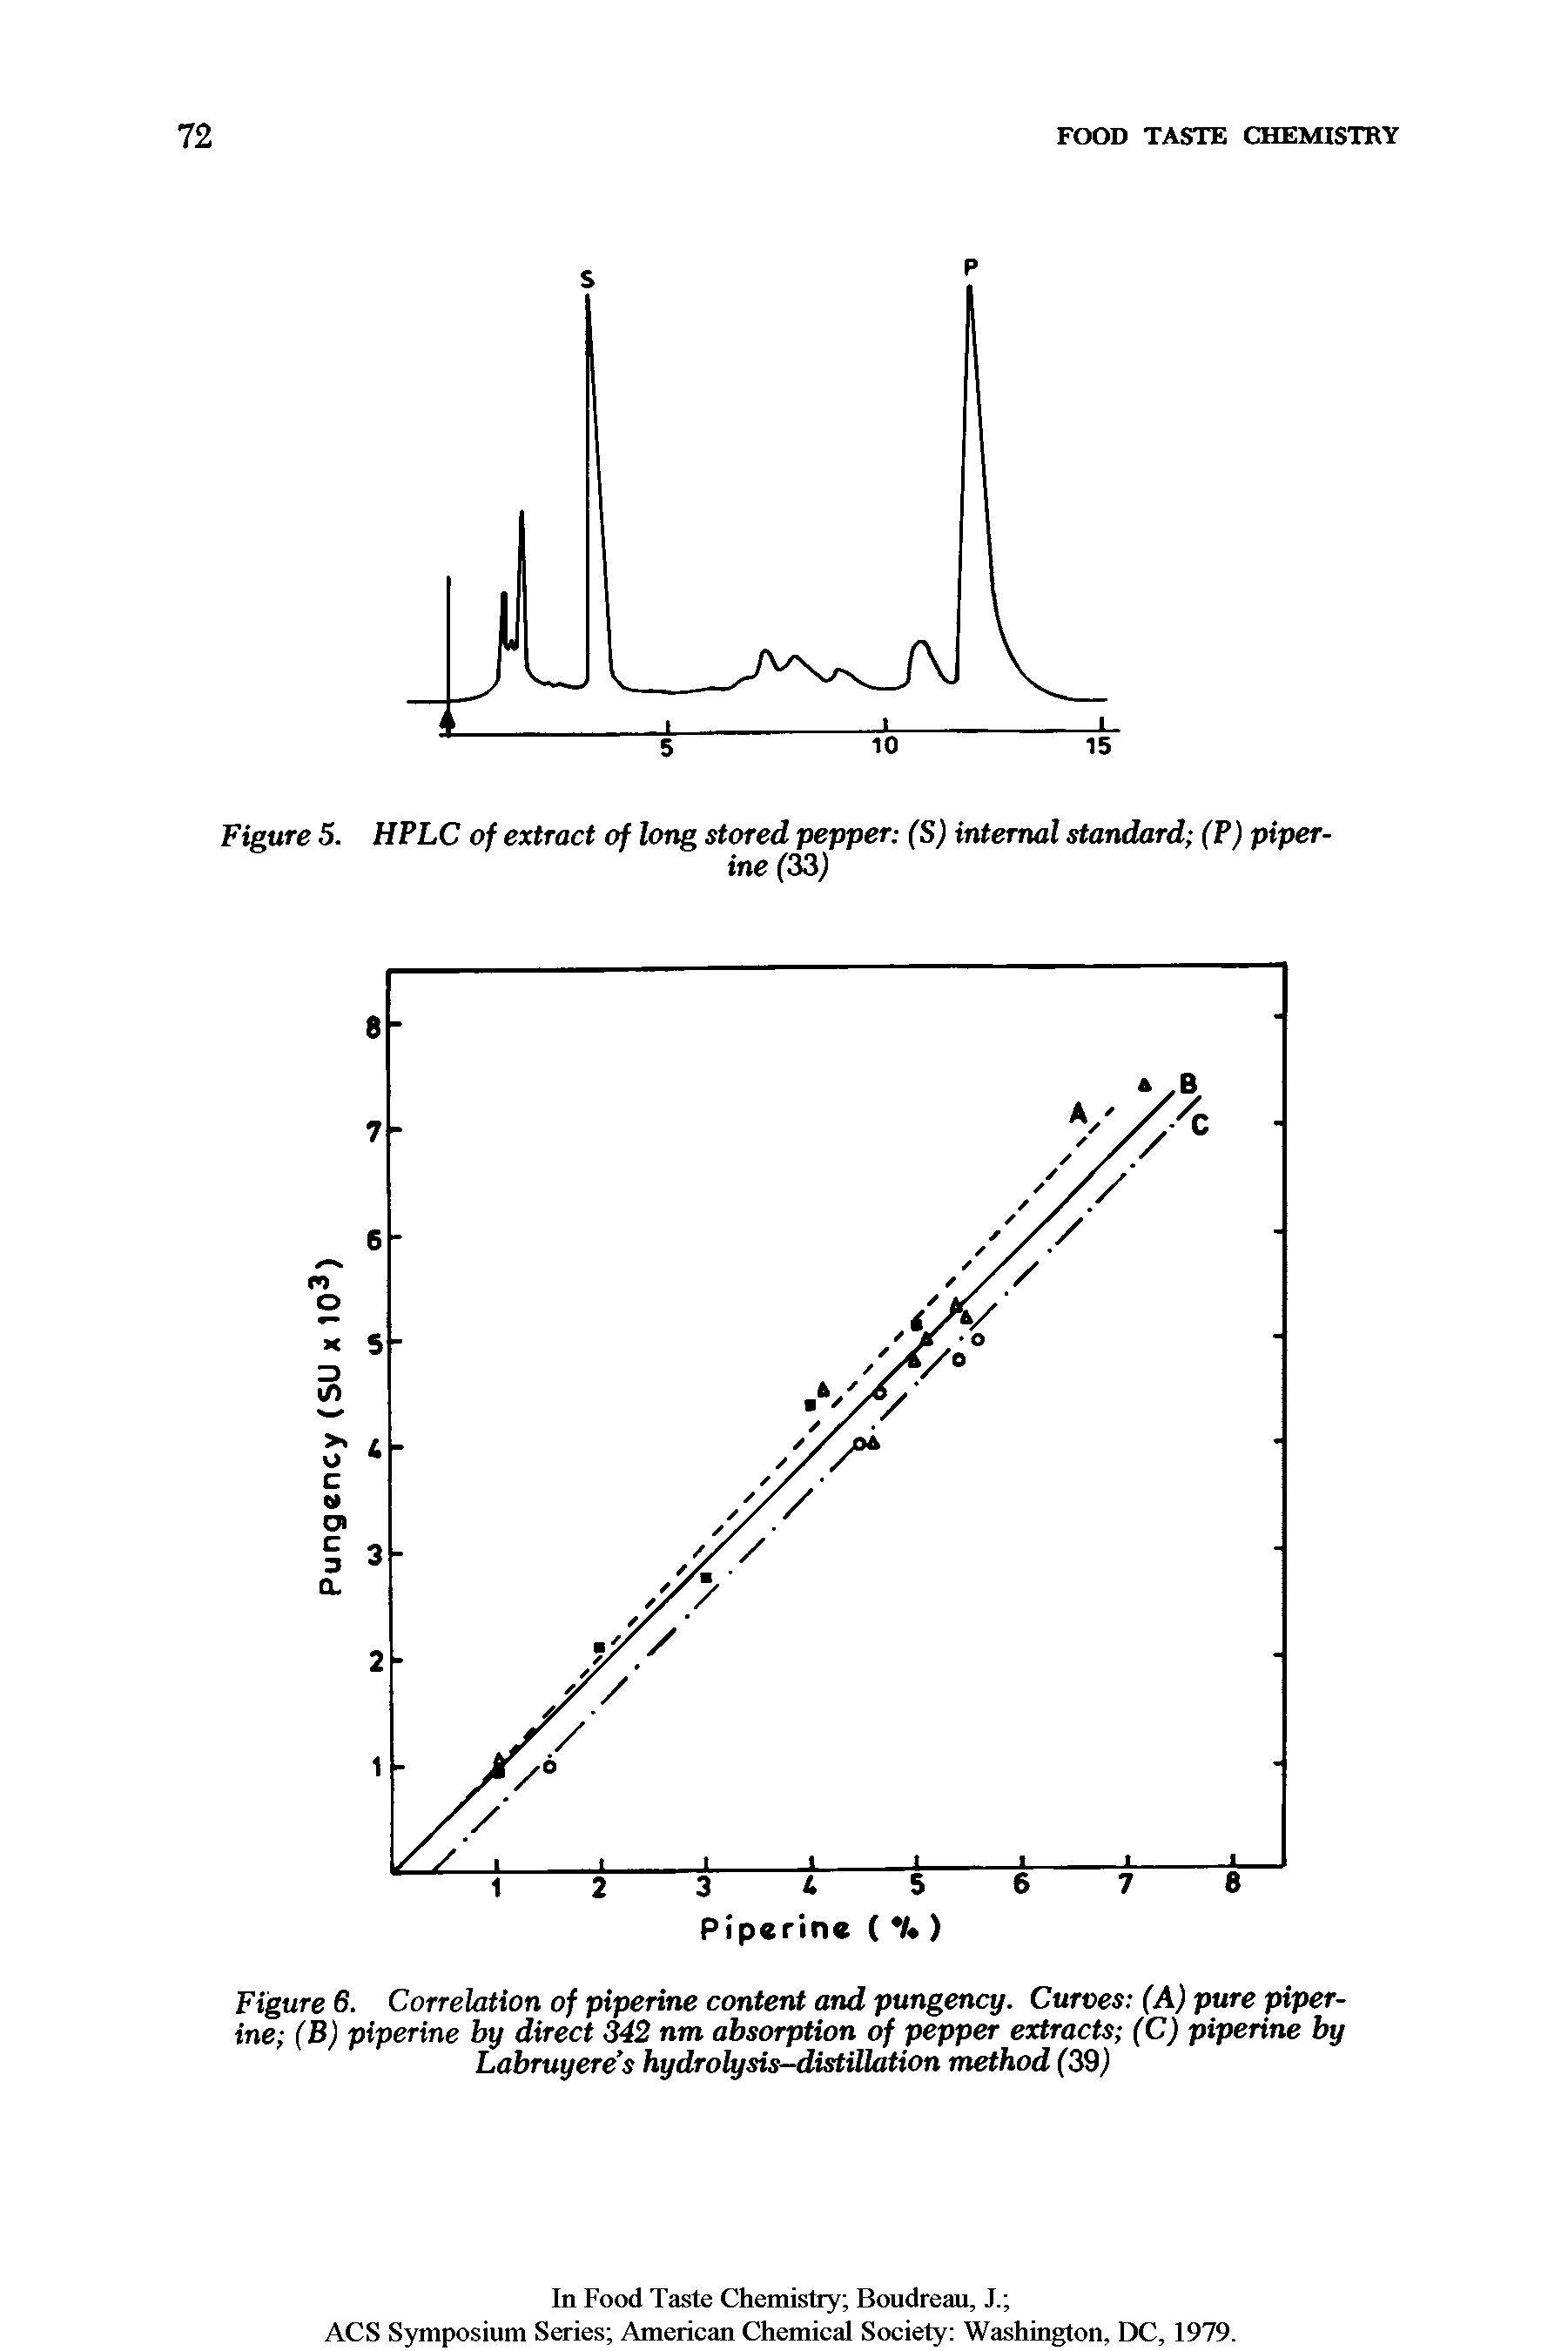 Figure 6. Correlation of pipeline content and pungency. Curves (A) pure piper-ine (B) piperine by direct 342 nm absorption of pepper extracts (C) pipeline by Labruyere s hydrolysis-distillation method (39)...